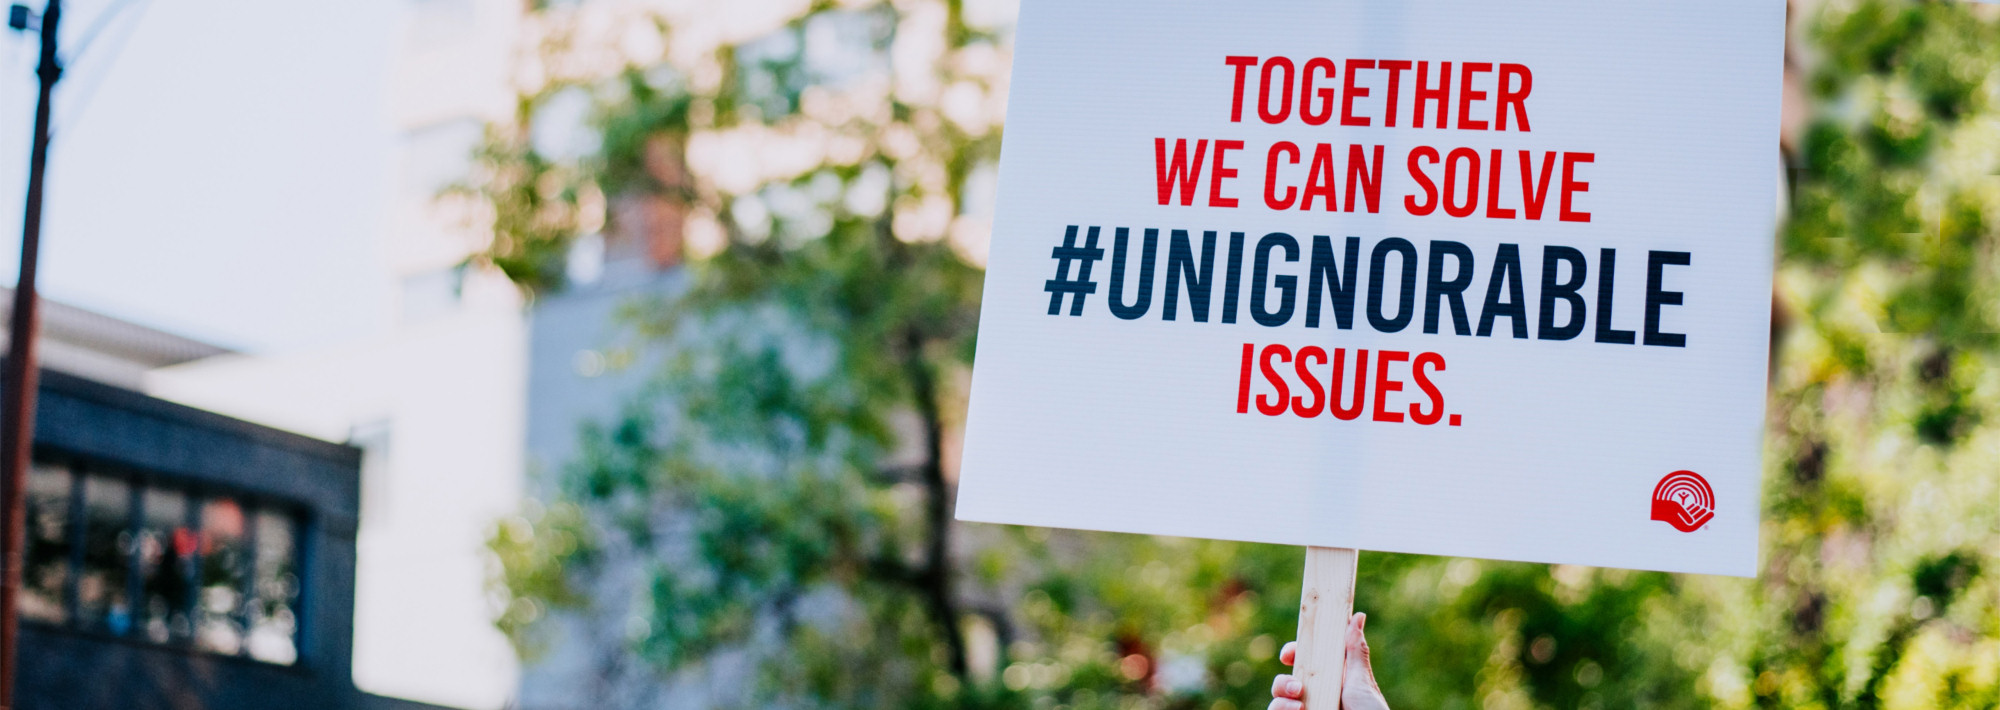 Together we can solve unignorable issues - banner image